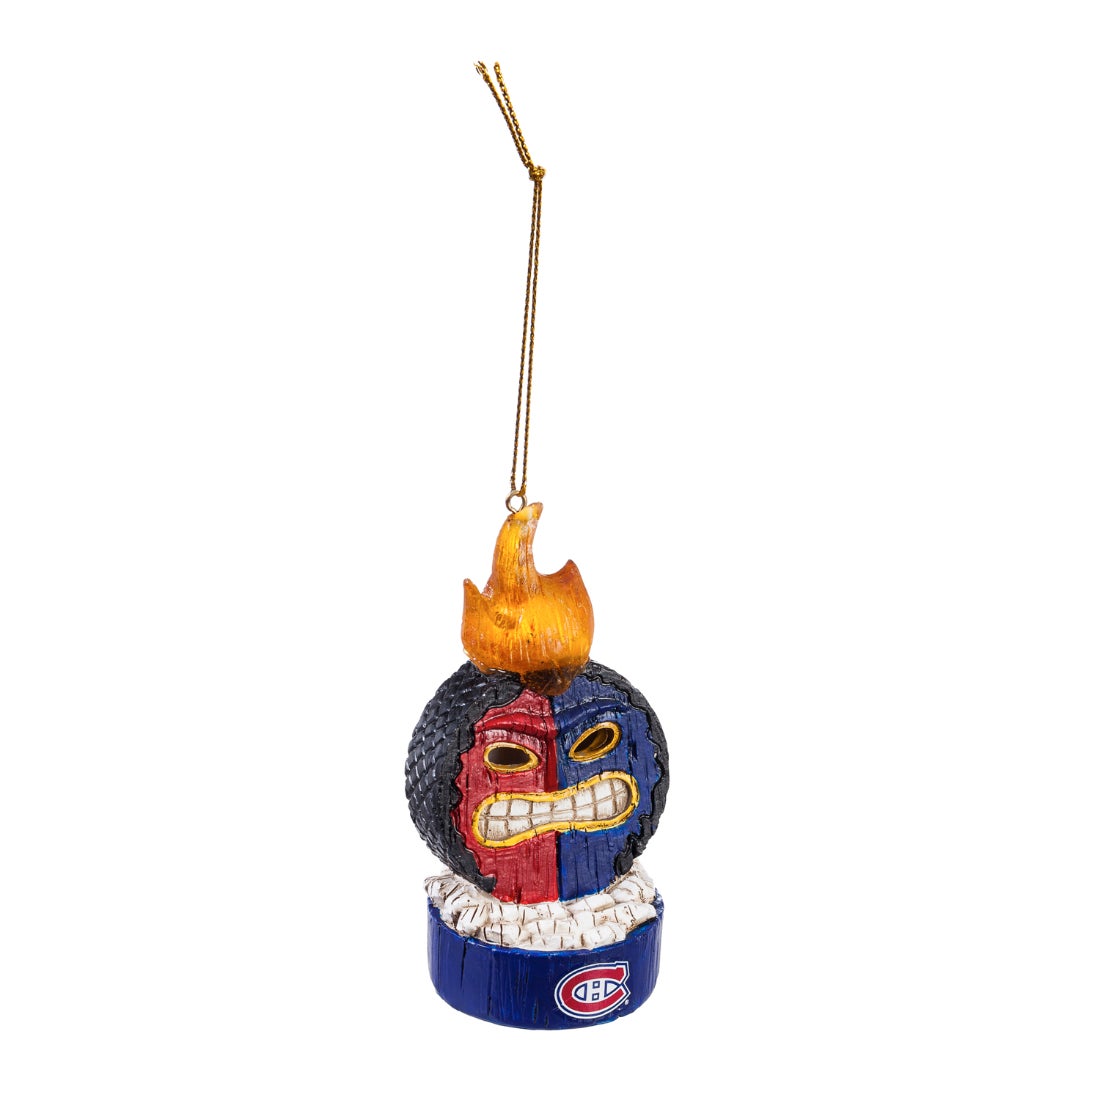 Montreal Canadiens Lit Team Ball Ornament